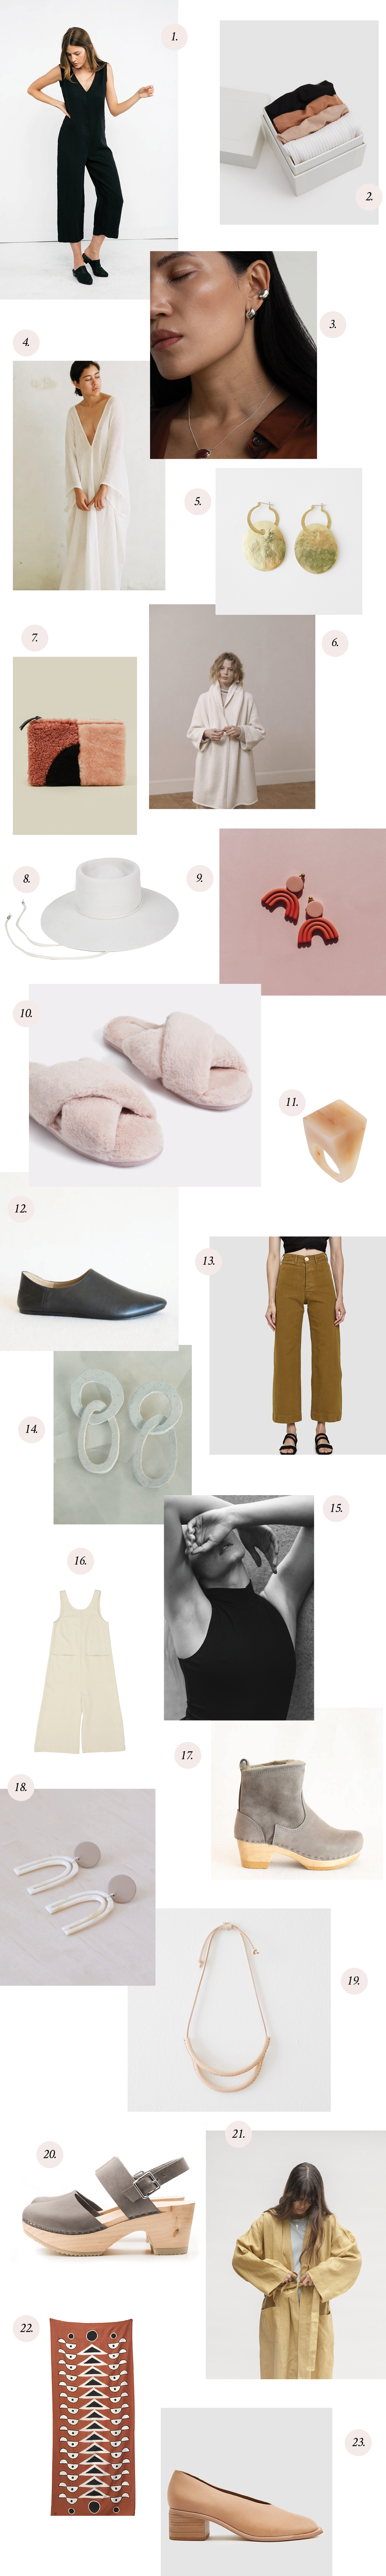 The 2018 Local Milk Blog Holiday and Christmas gift guide is full of beautiful, sustainable, minimalist, and hand-crafted ideas For Slow Fashion & Style for Her to suit every budget. We have gifts from artisans, makers, small shops, designers, and more. 